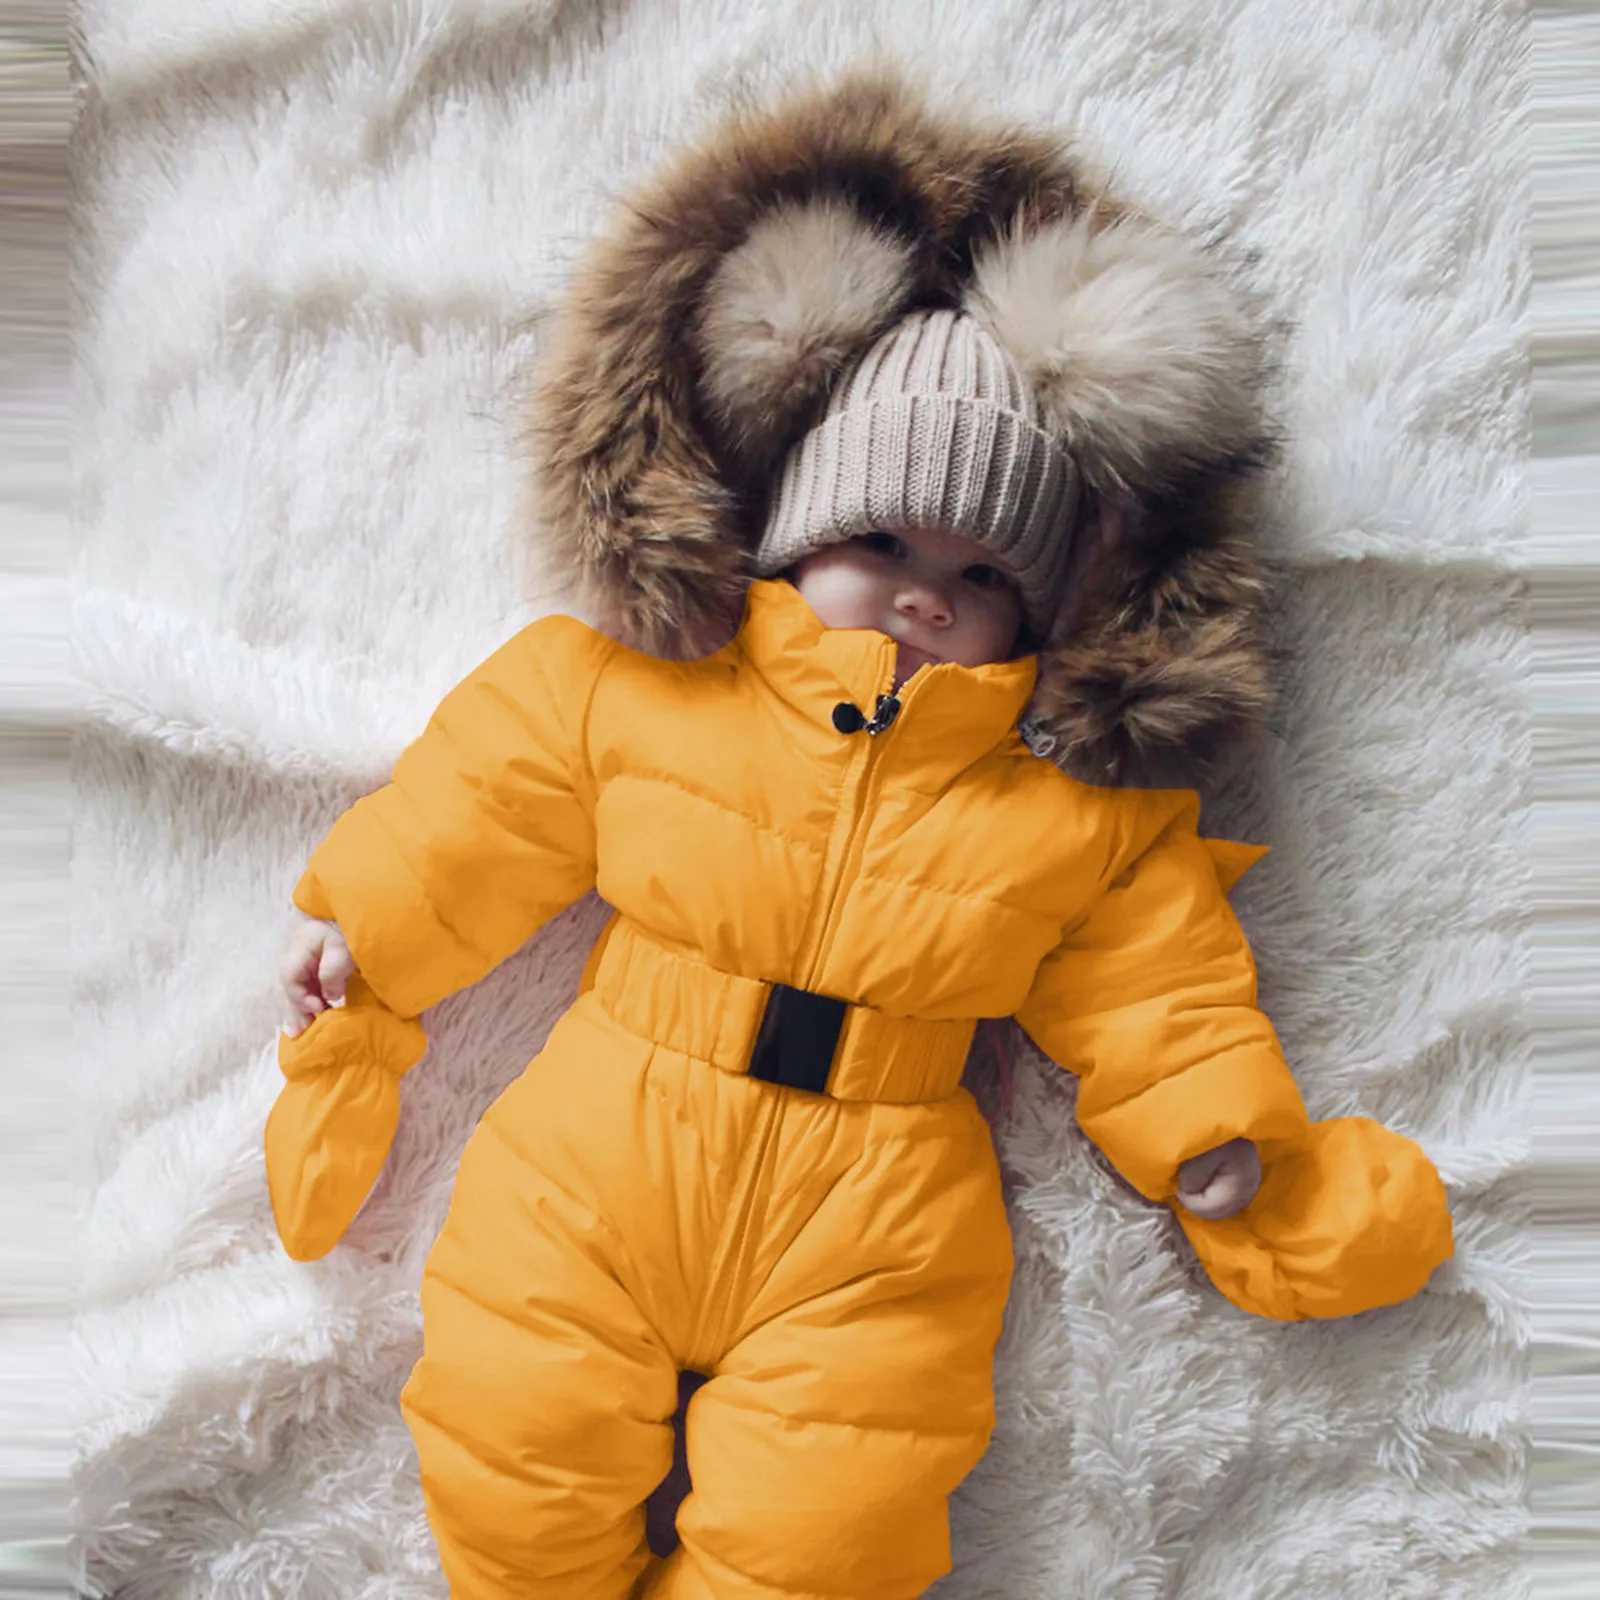 Toddler Baby Boys Girl Romper Hooded Jacket Jumpsuit Coat Outfit Winter Snowsuit 